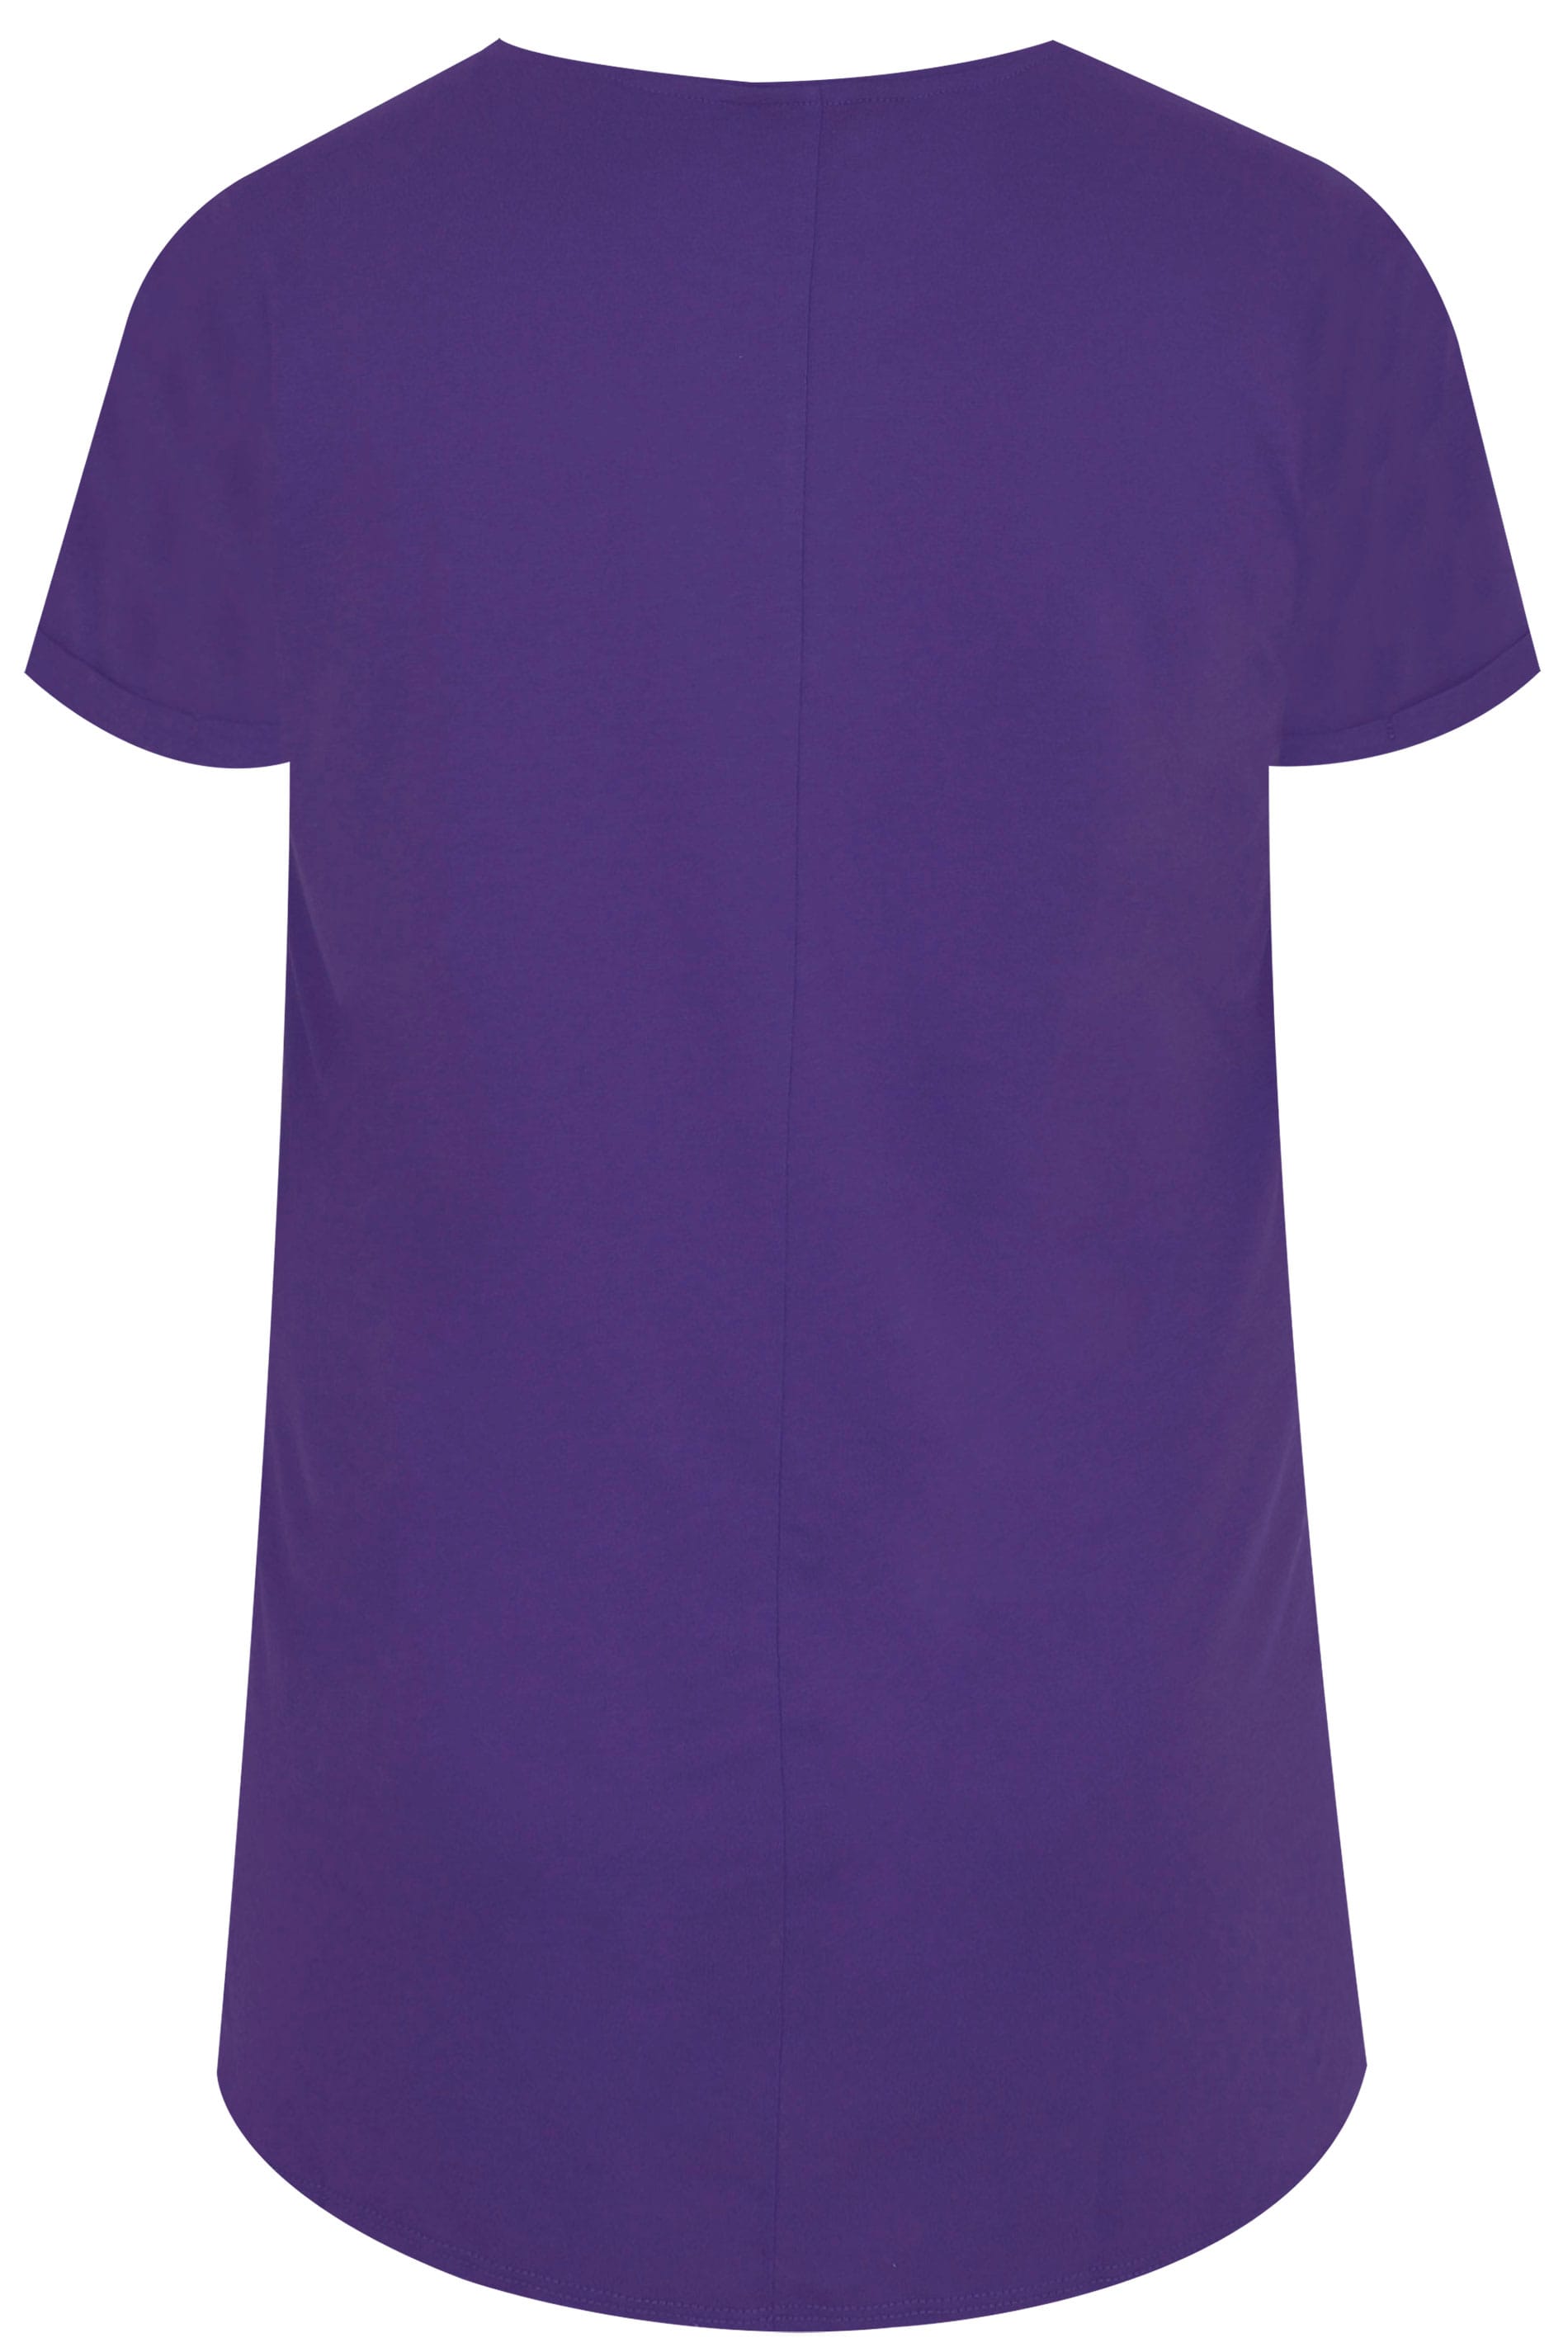 Download Purple Pocket T-Shirt With Curved Hem, Plus size 16 to 36